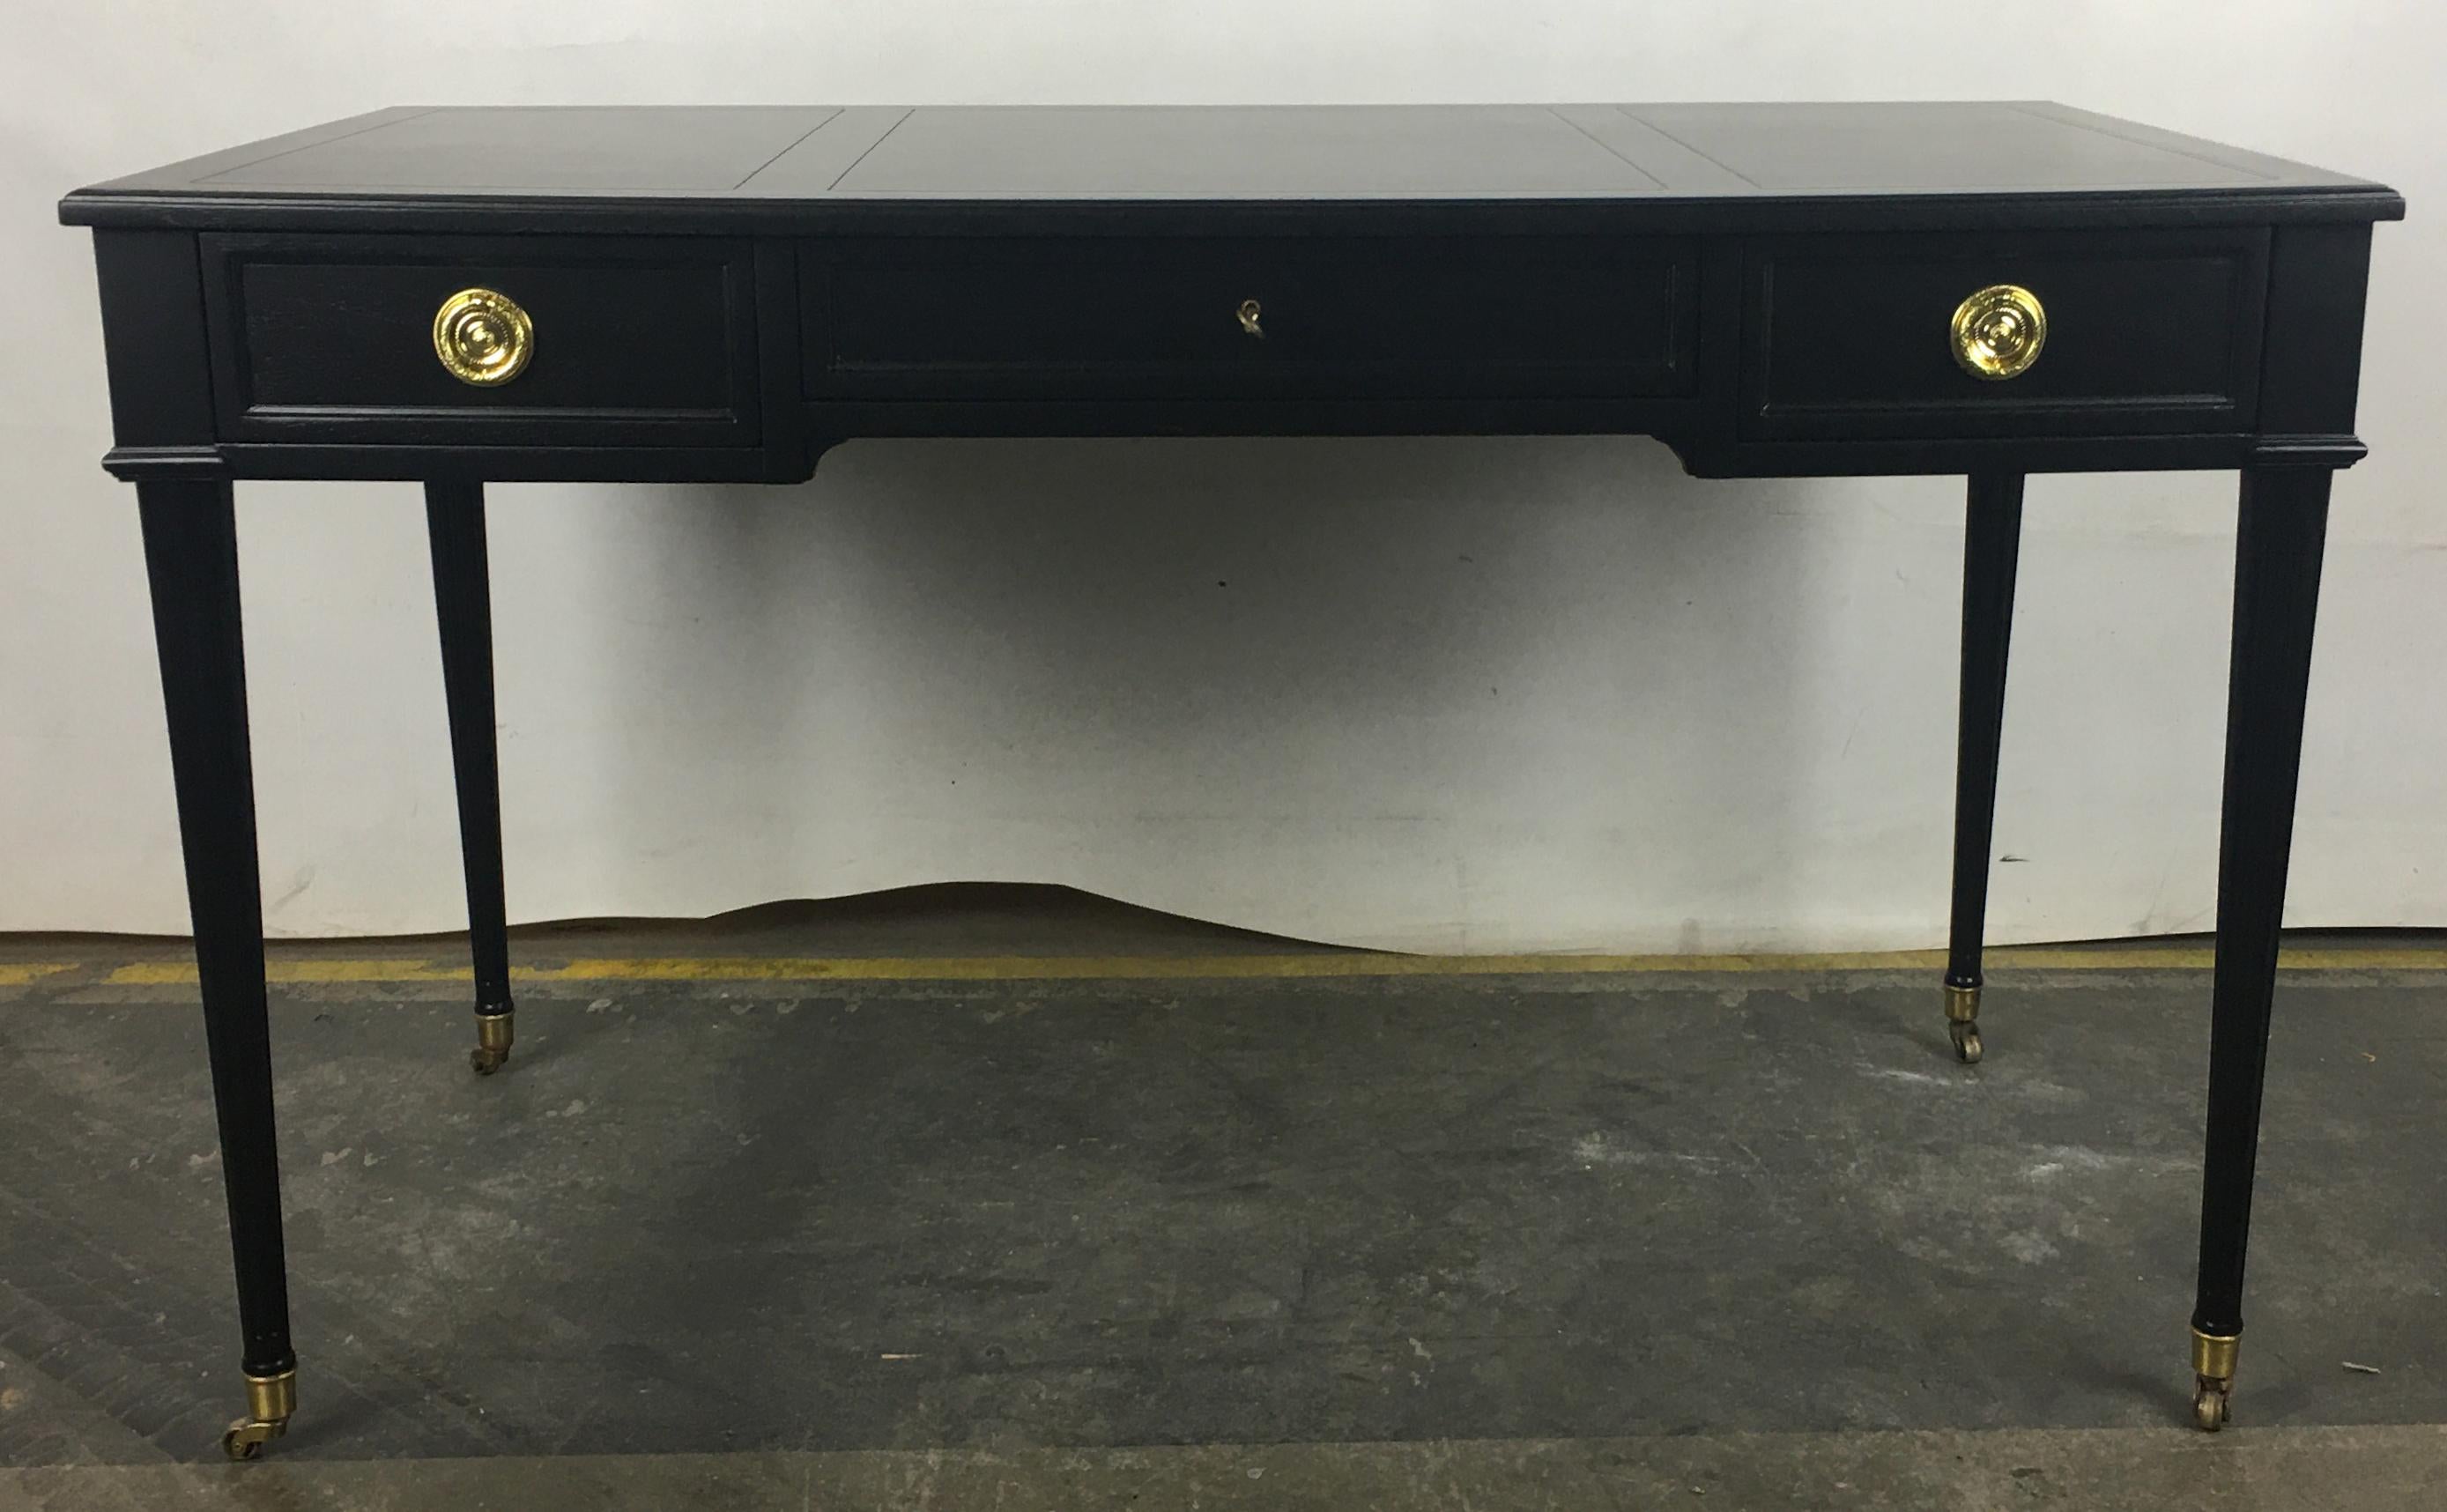 Handsome writing desk in black lacquer by Baker/Milling Road. Features brass hardware and cup casters and the center drawer is both locked and pulls open with the key. The writing surface is wood and divided into three panels. Finished on all sides.